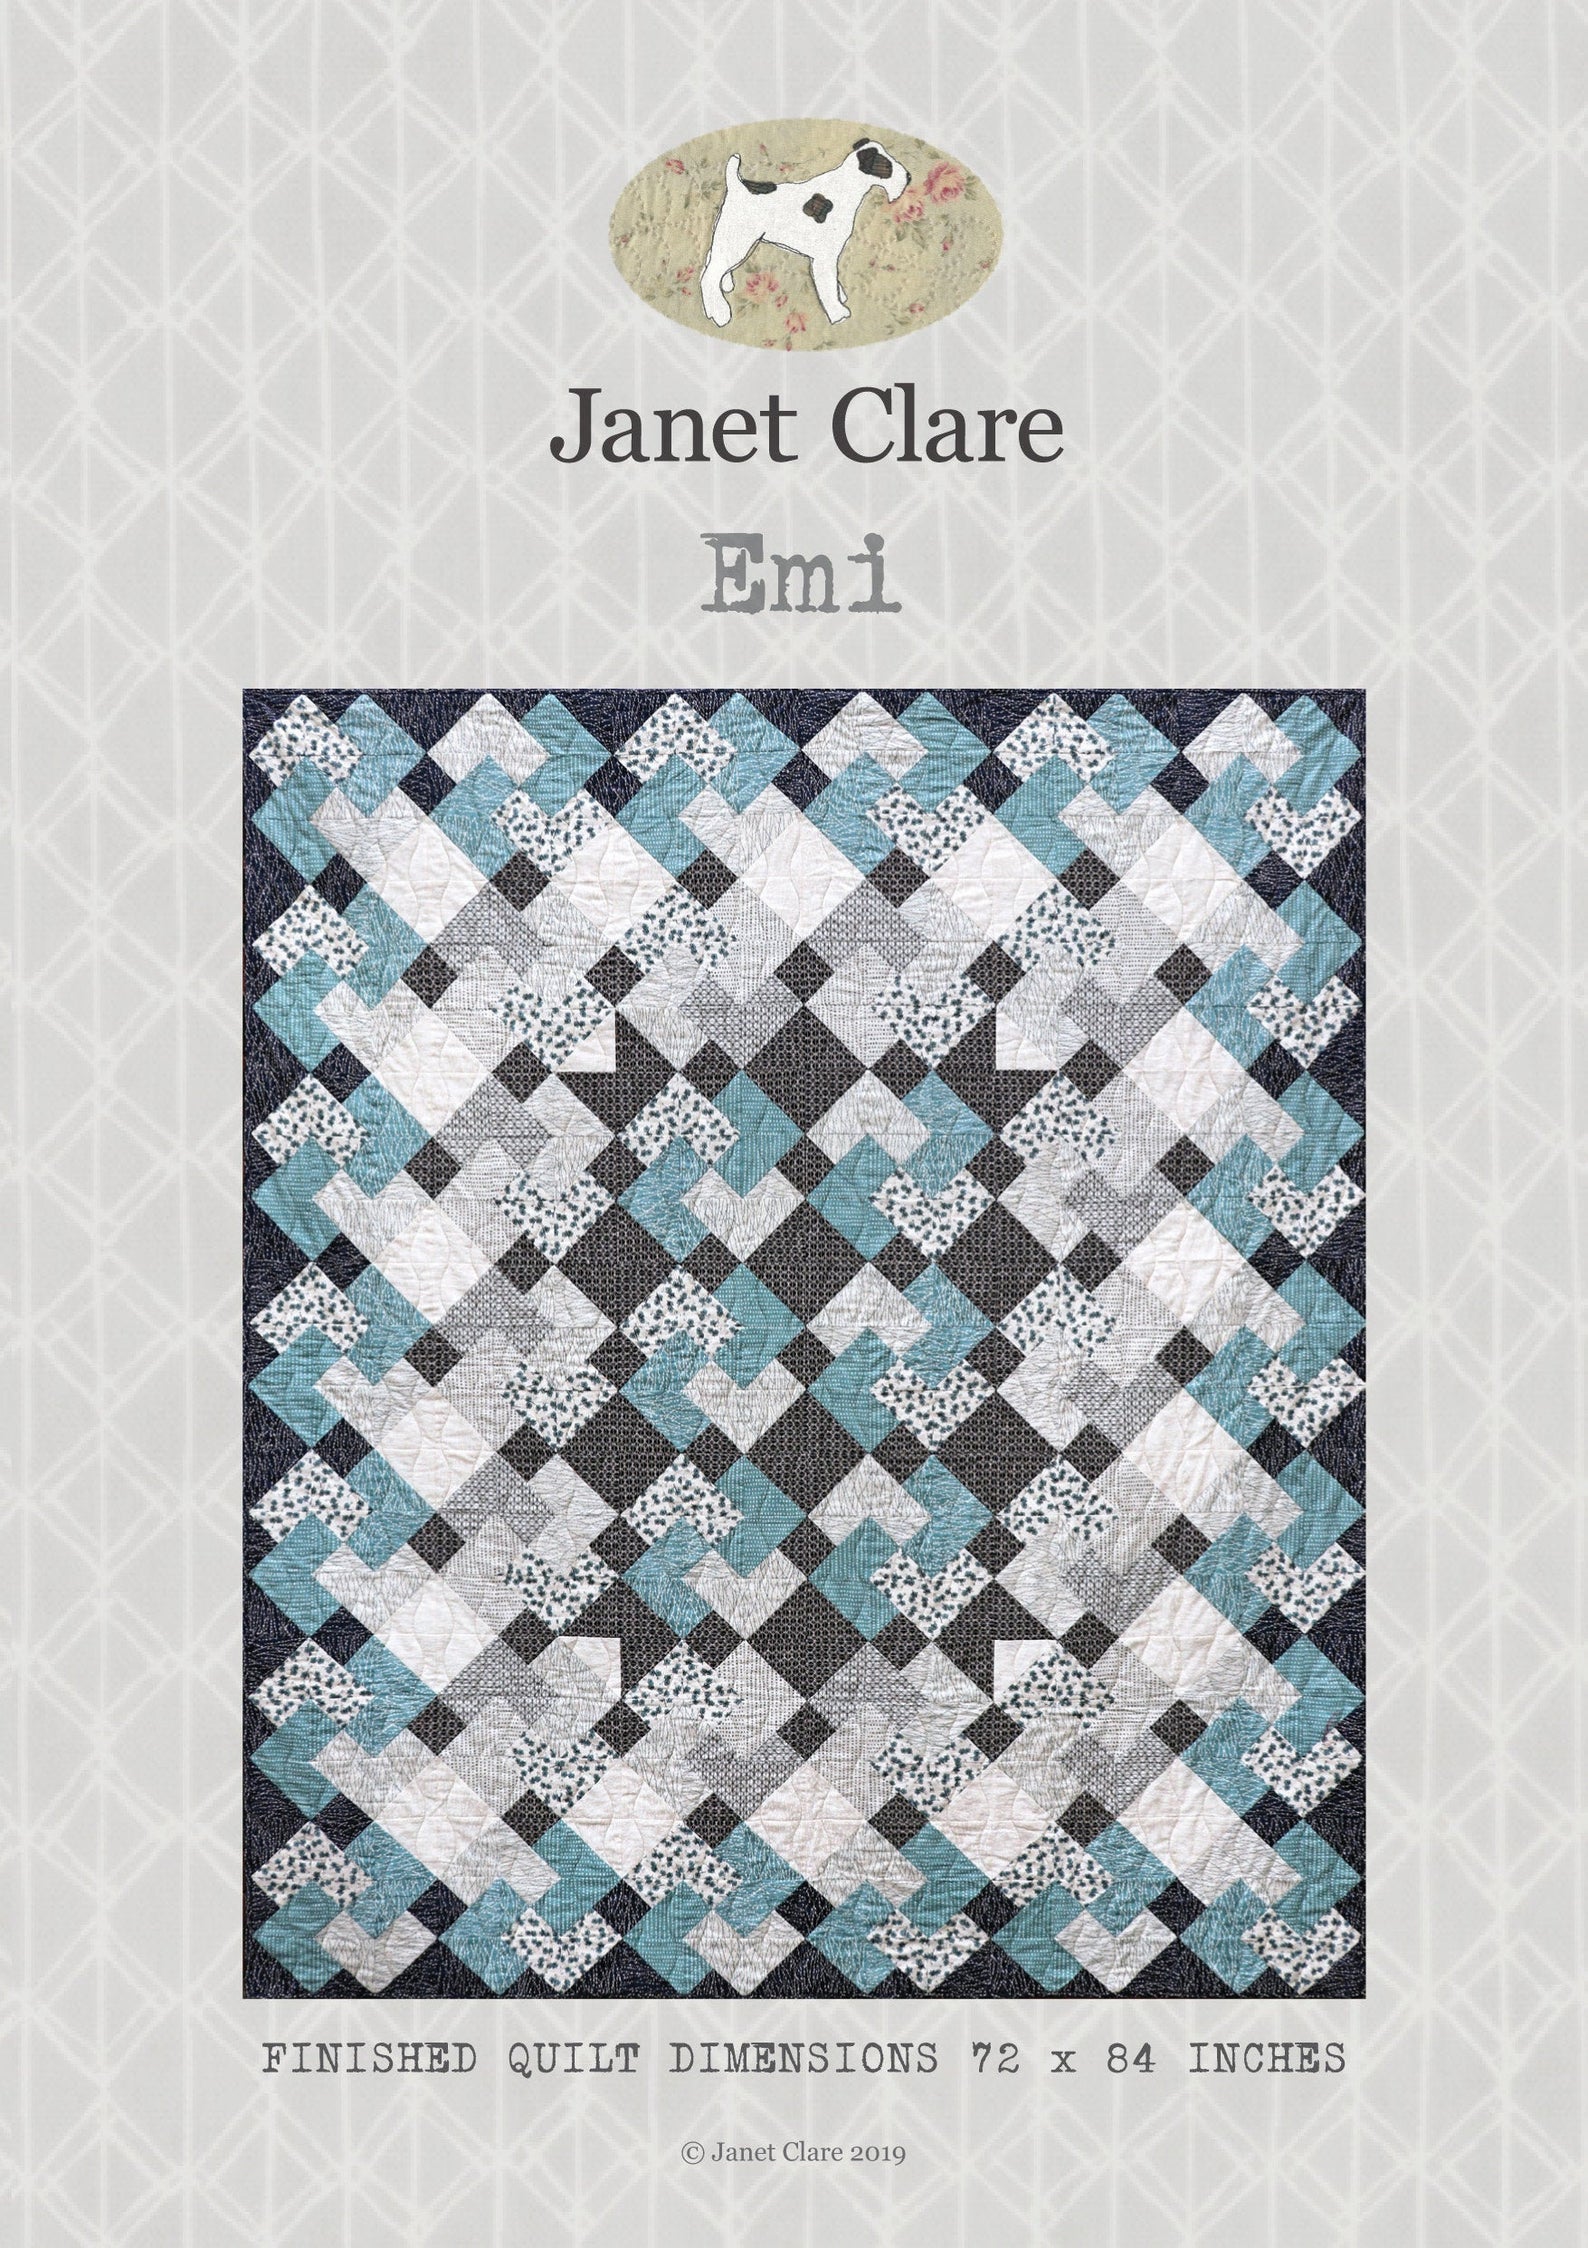 Janet Clare Emi - Quilt Pattern - A beautiful geometric design using traditional patchwork techniques 